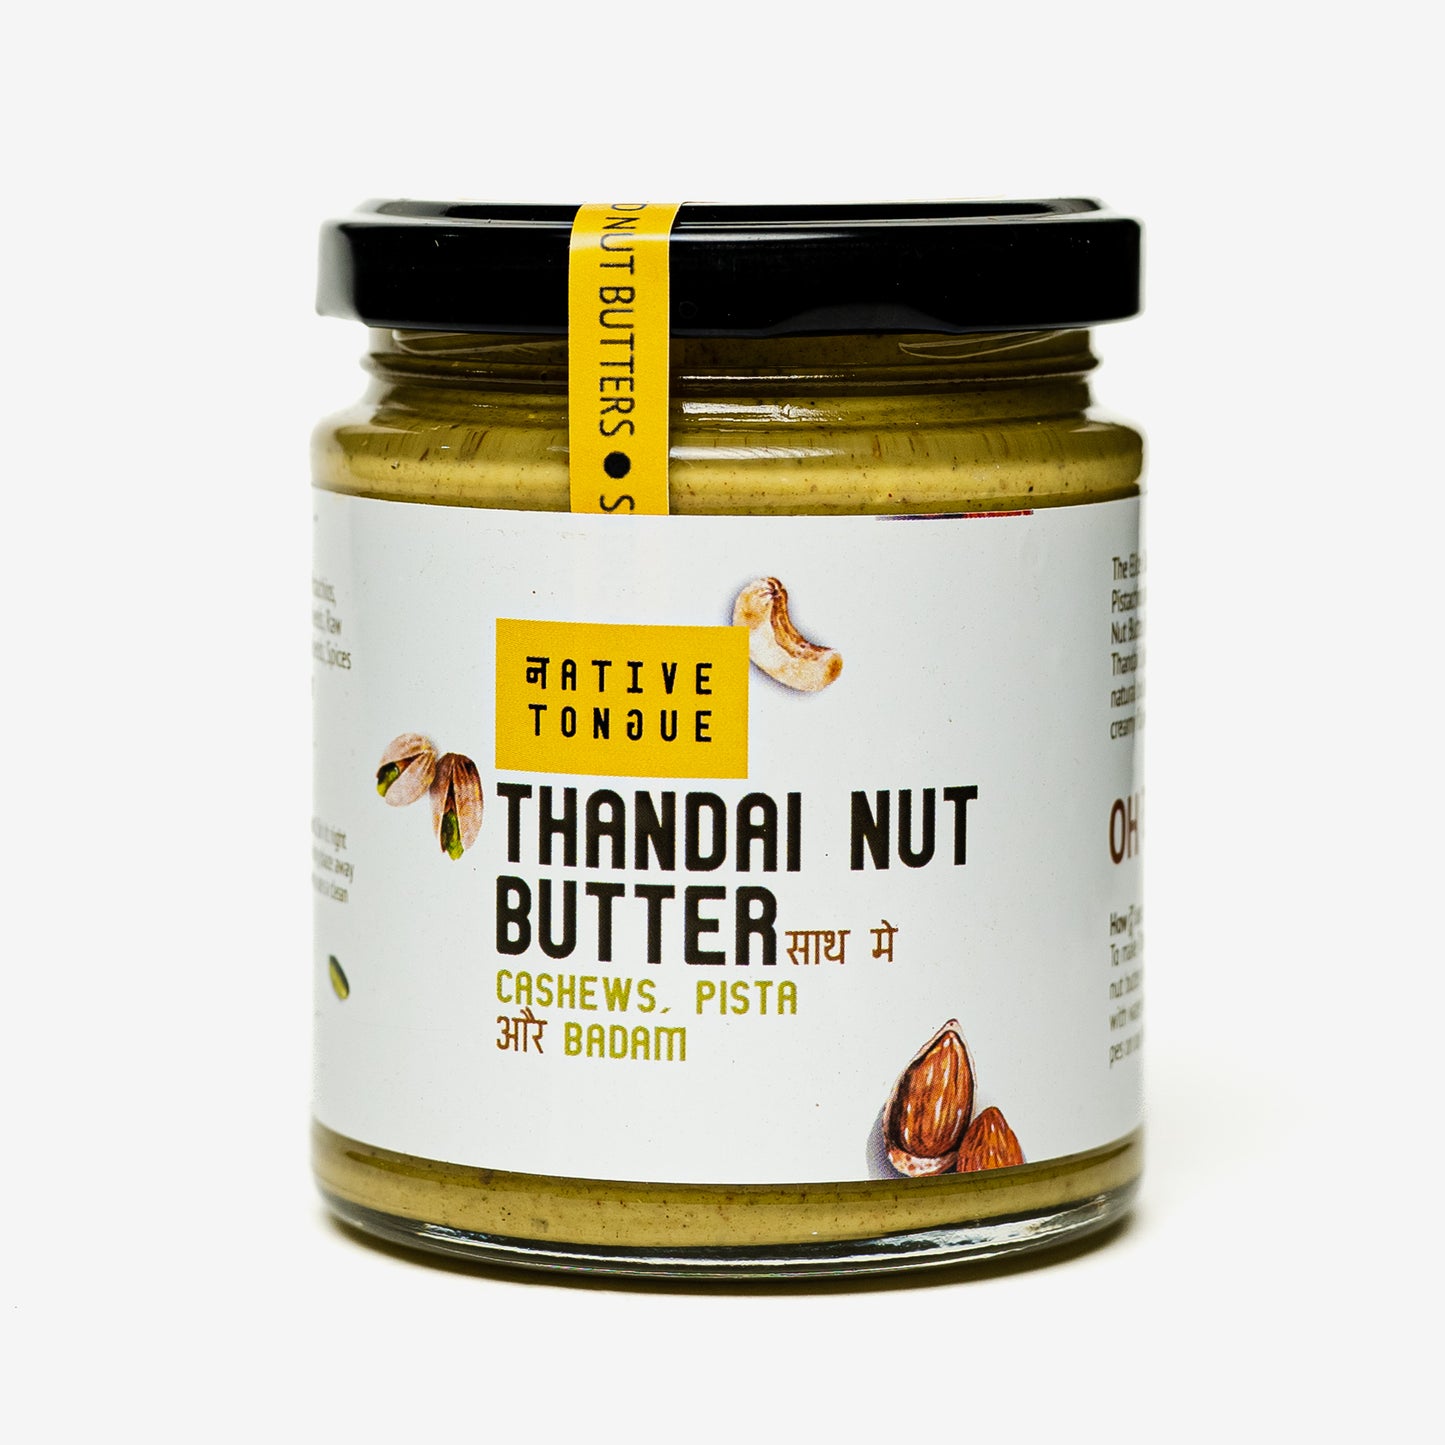 Thandai Nut Butter with Cashew Nut, Pistachio and Almond